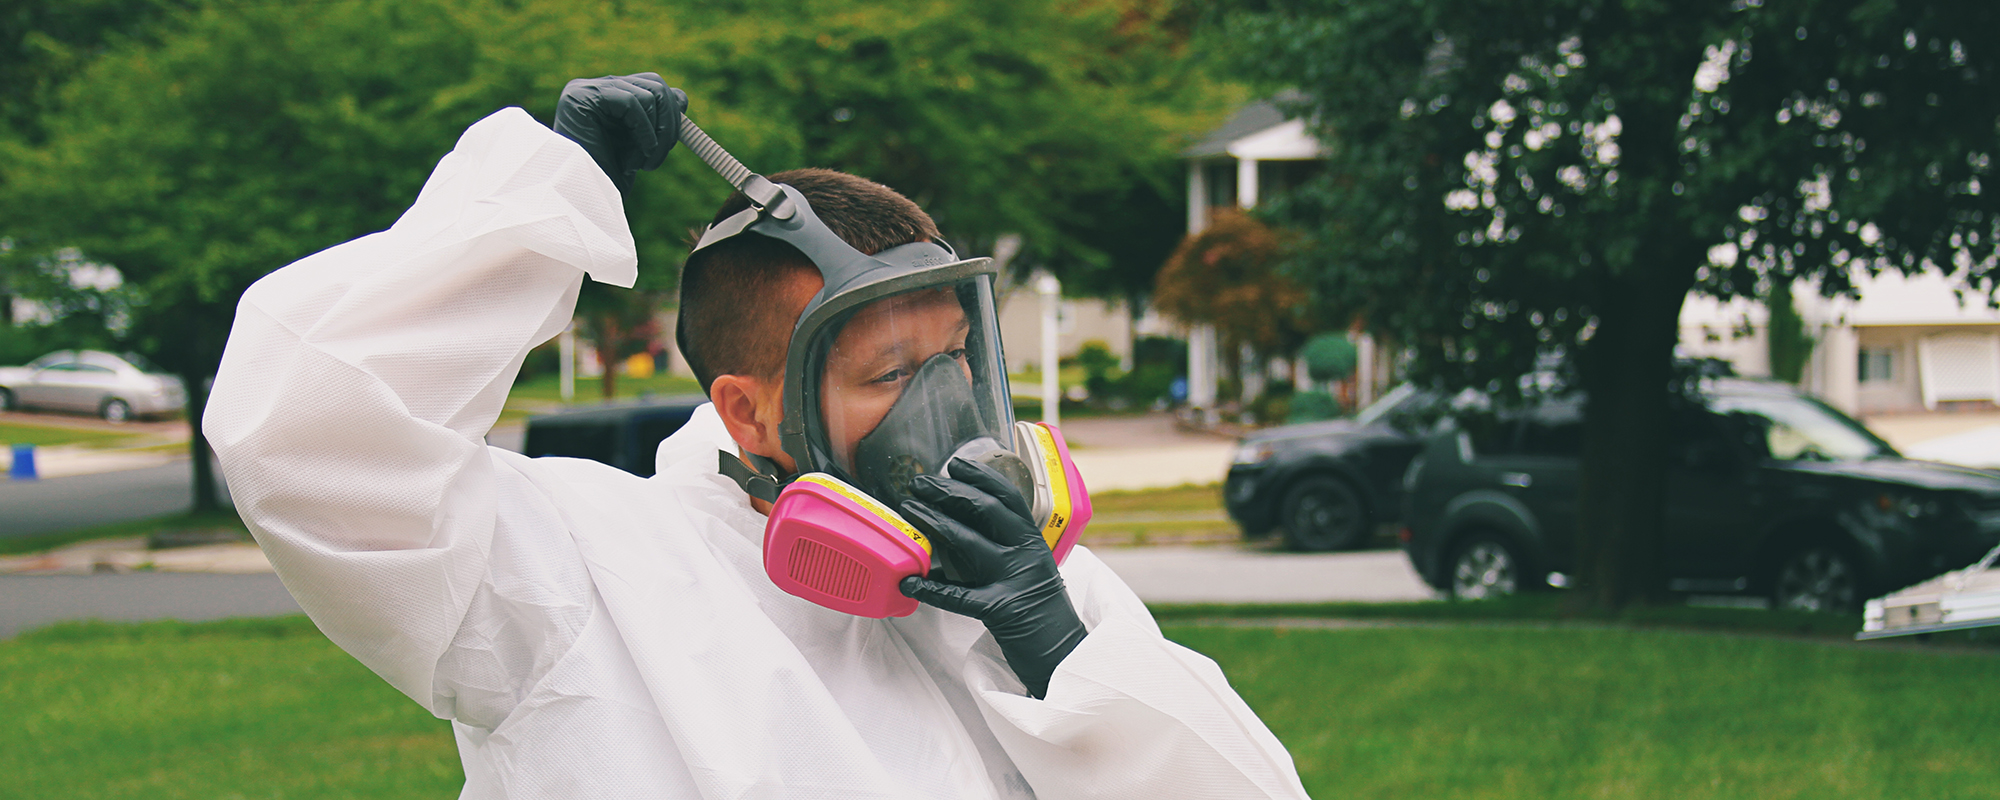 toxic mold removal south jersey